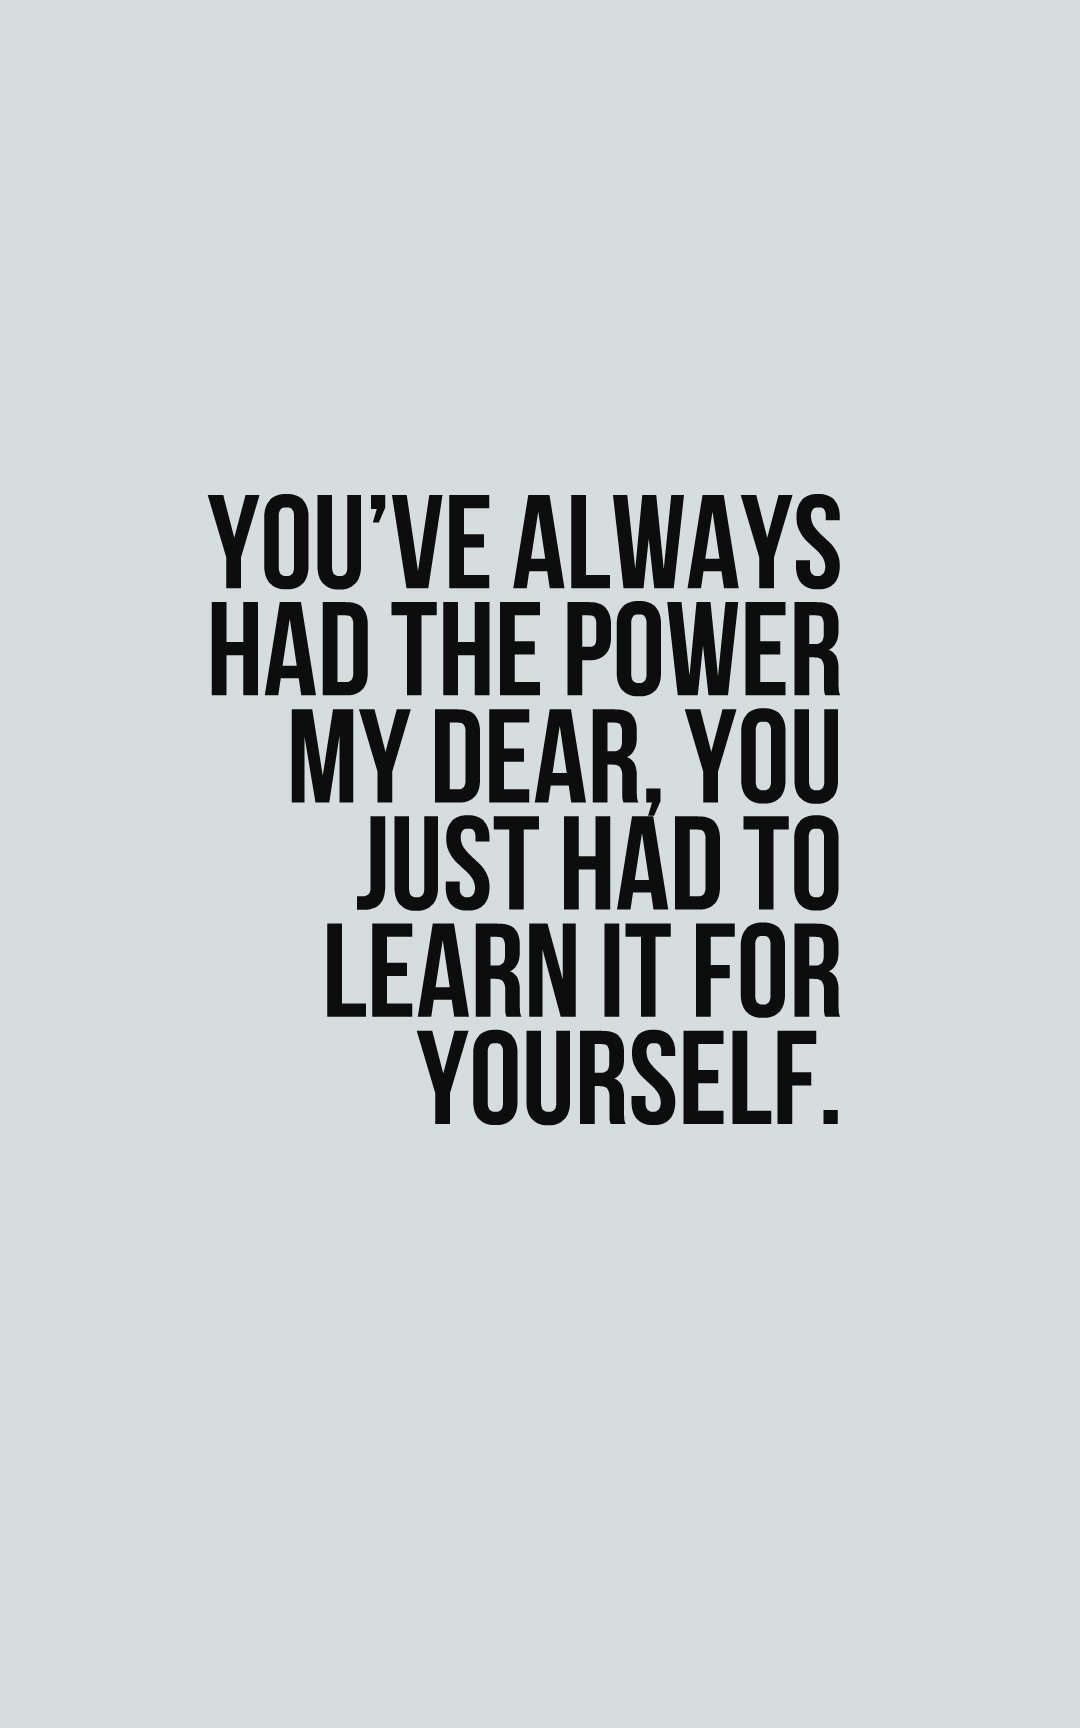 You’ve always had the power my dear, you just had to learn it for yourself.